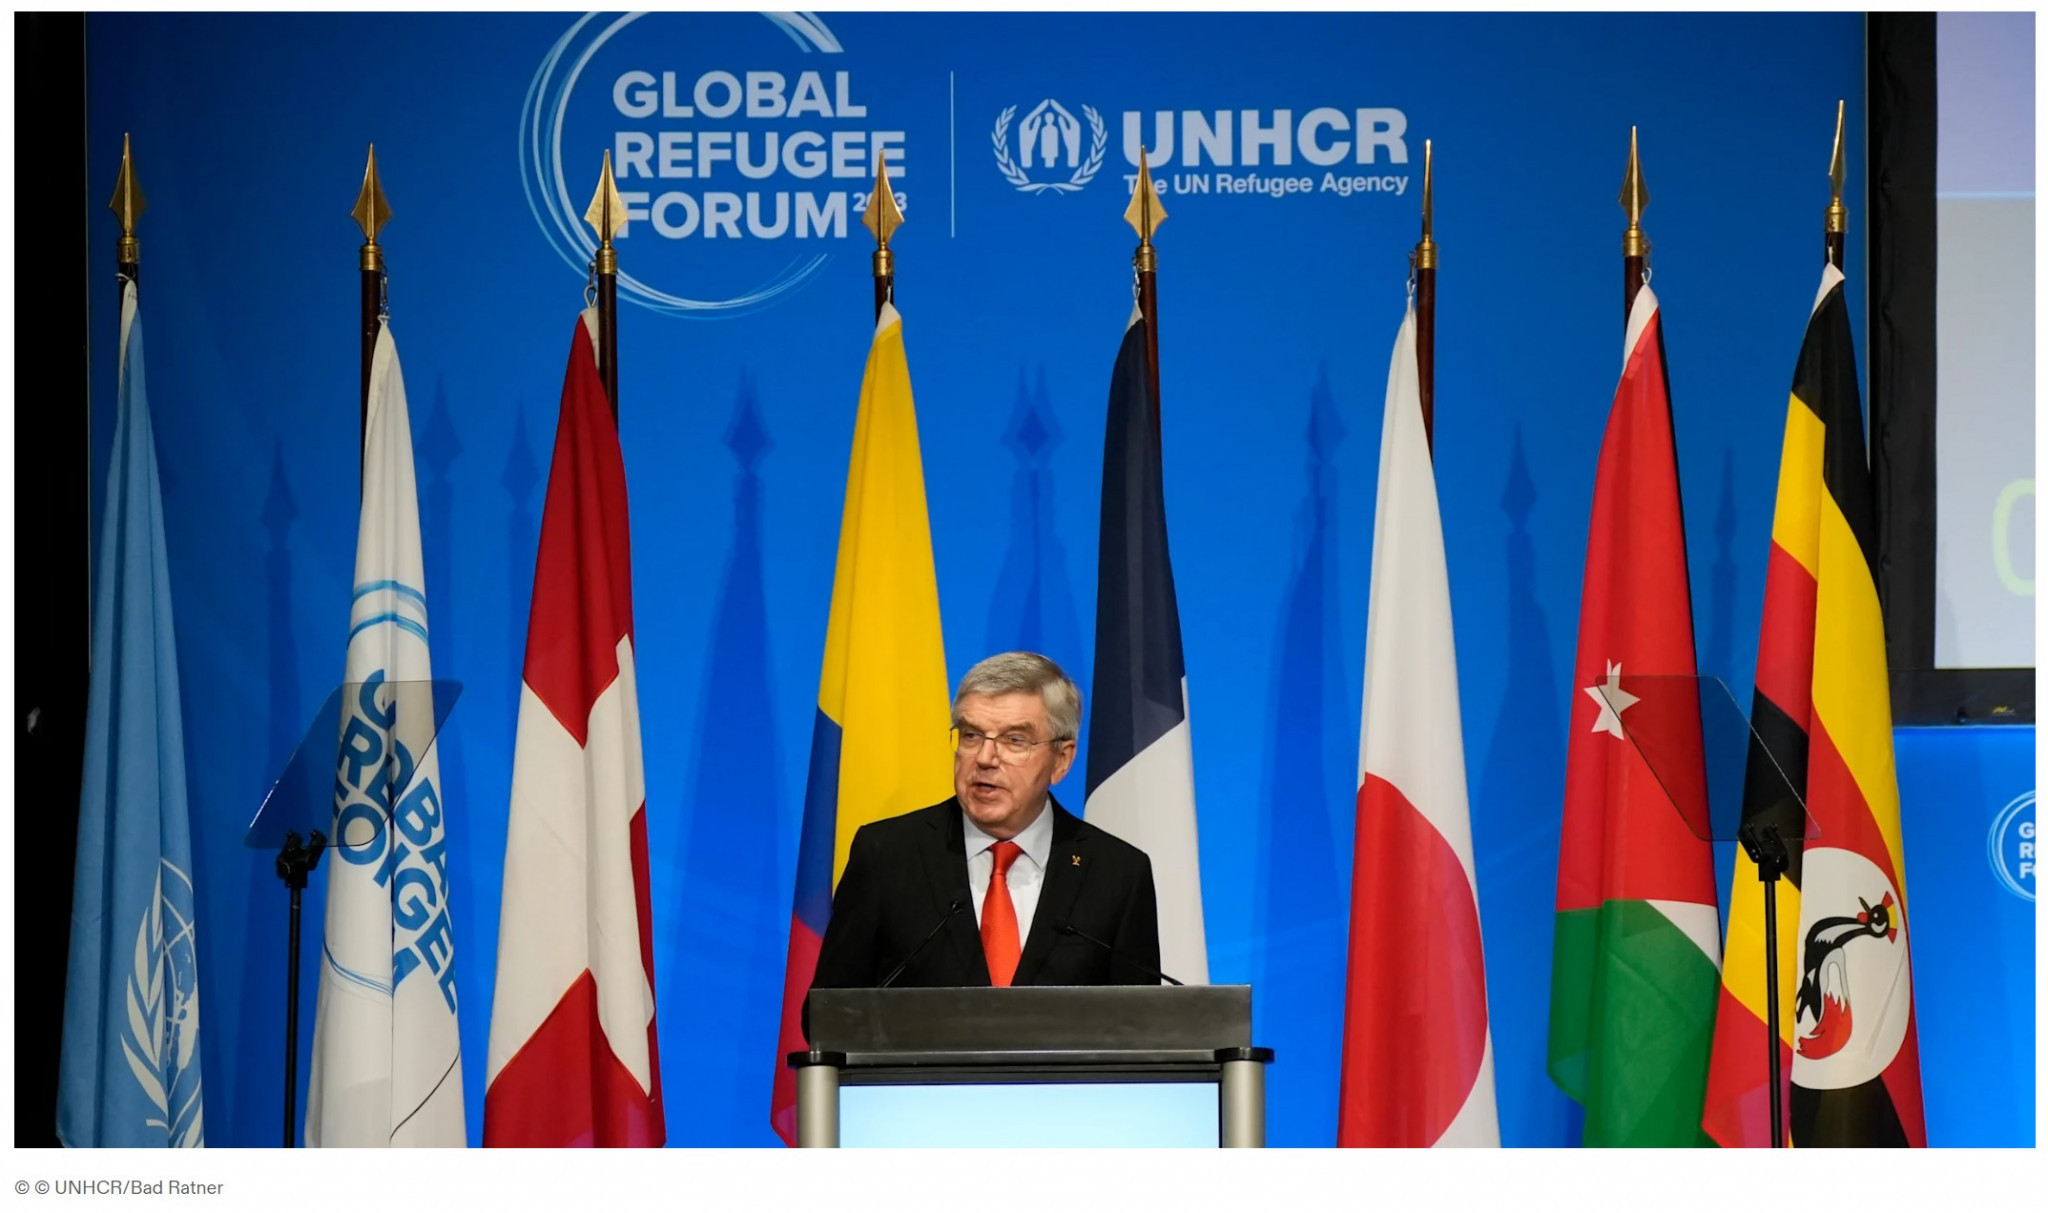 Thomas Bach defends allowing Russians and Belarusians as neutrals at Paris Olympics. UNHCR